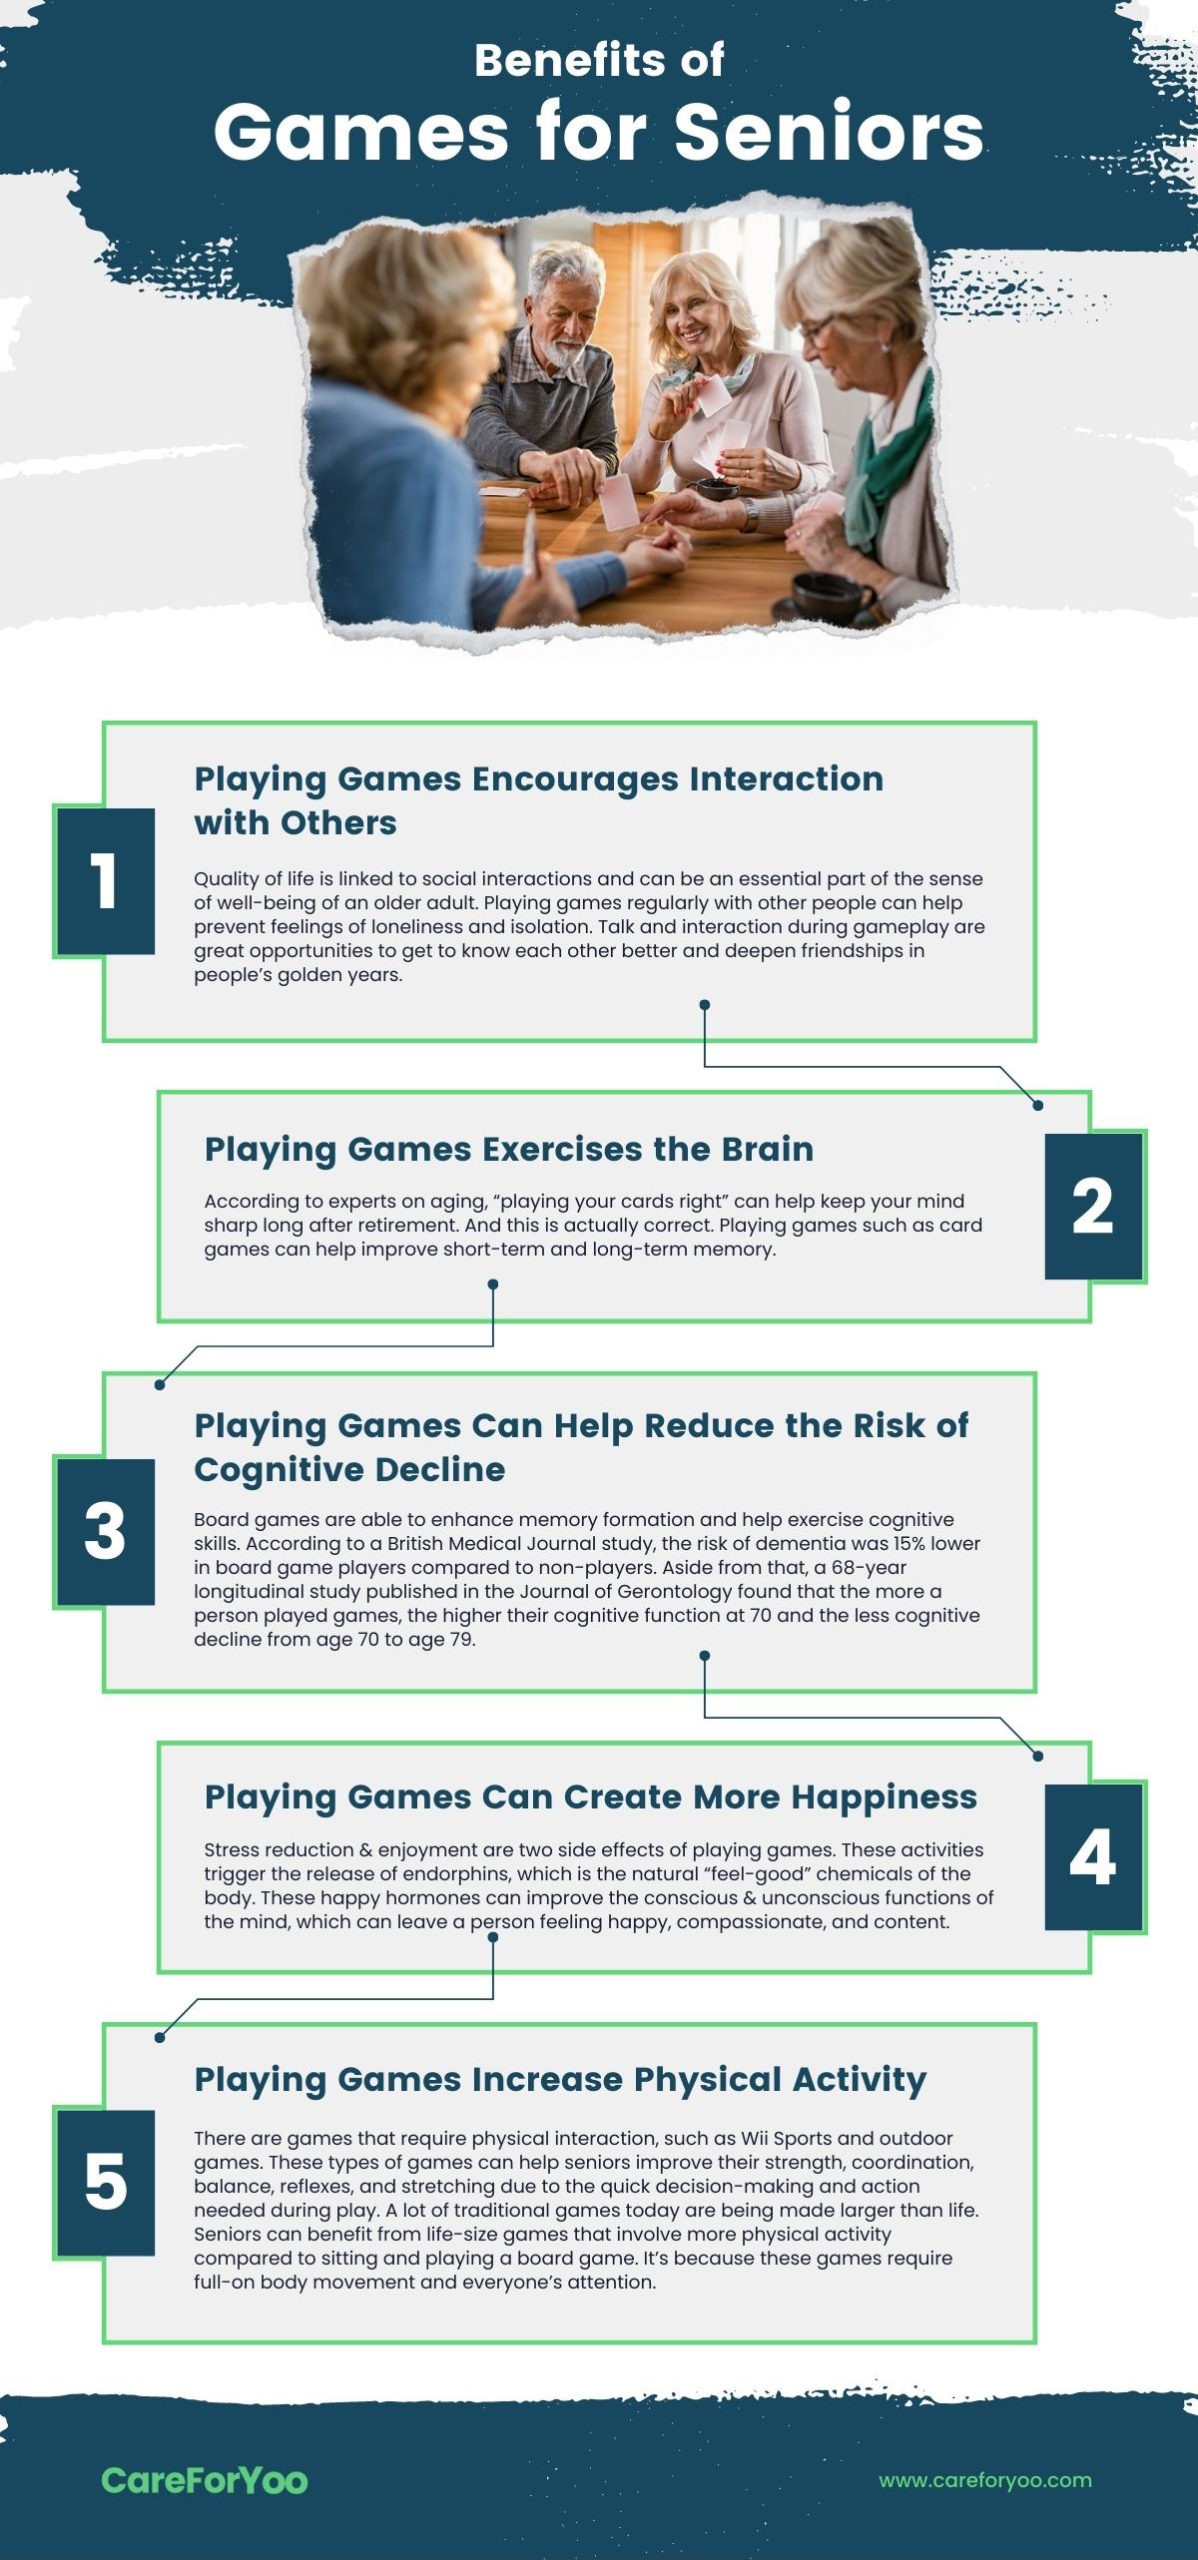 an overview of benefits that games bring for seniors